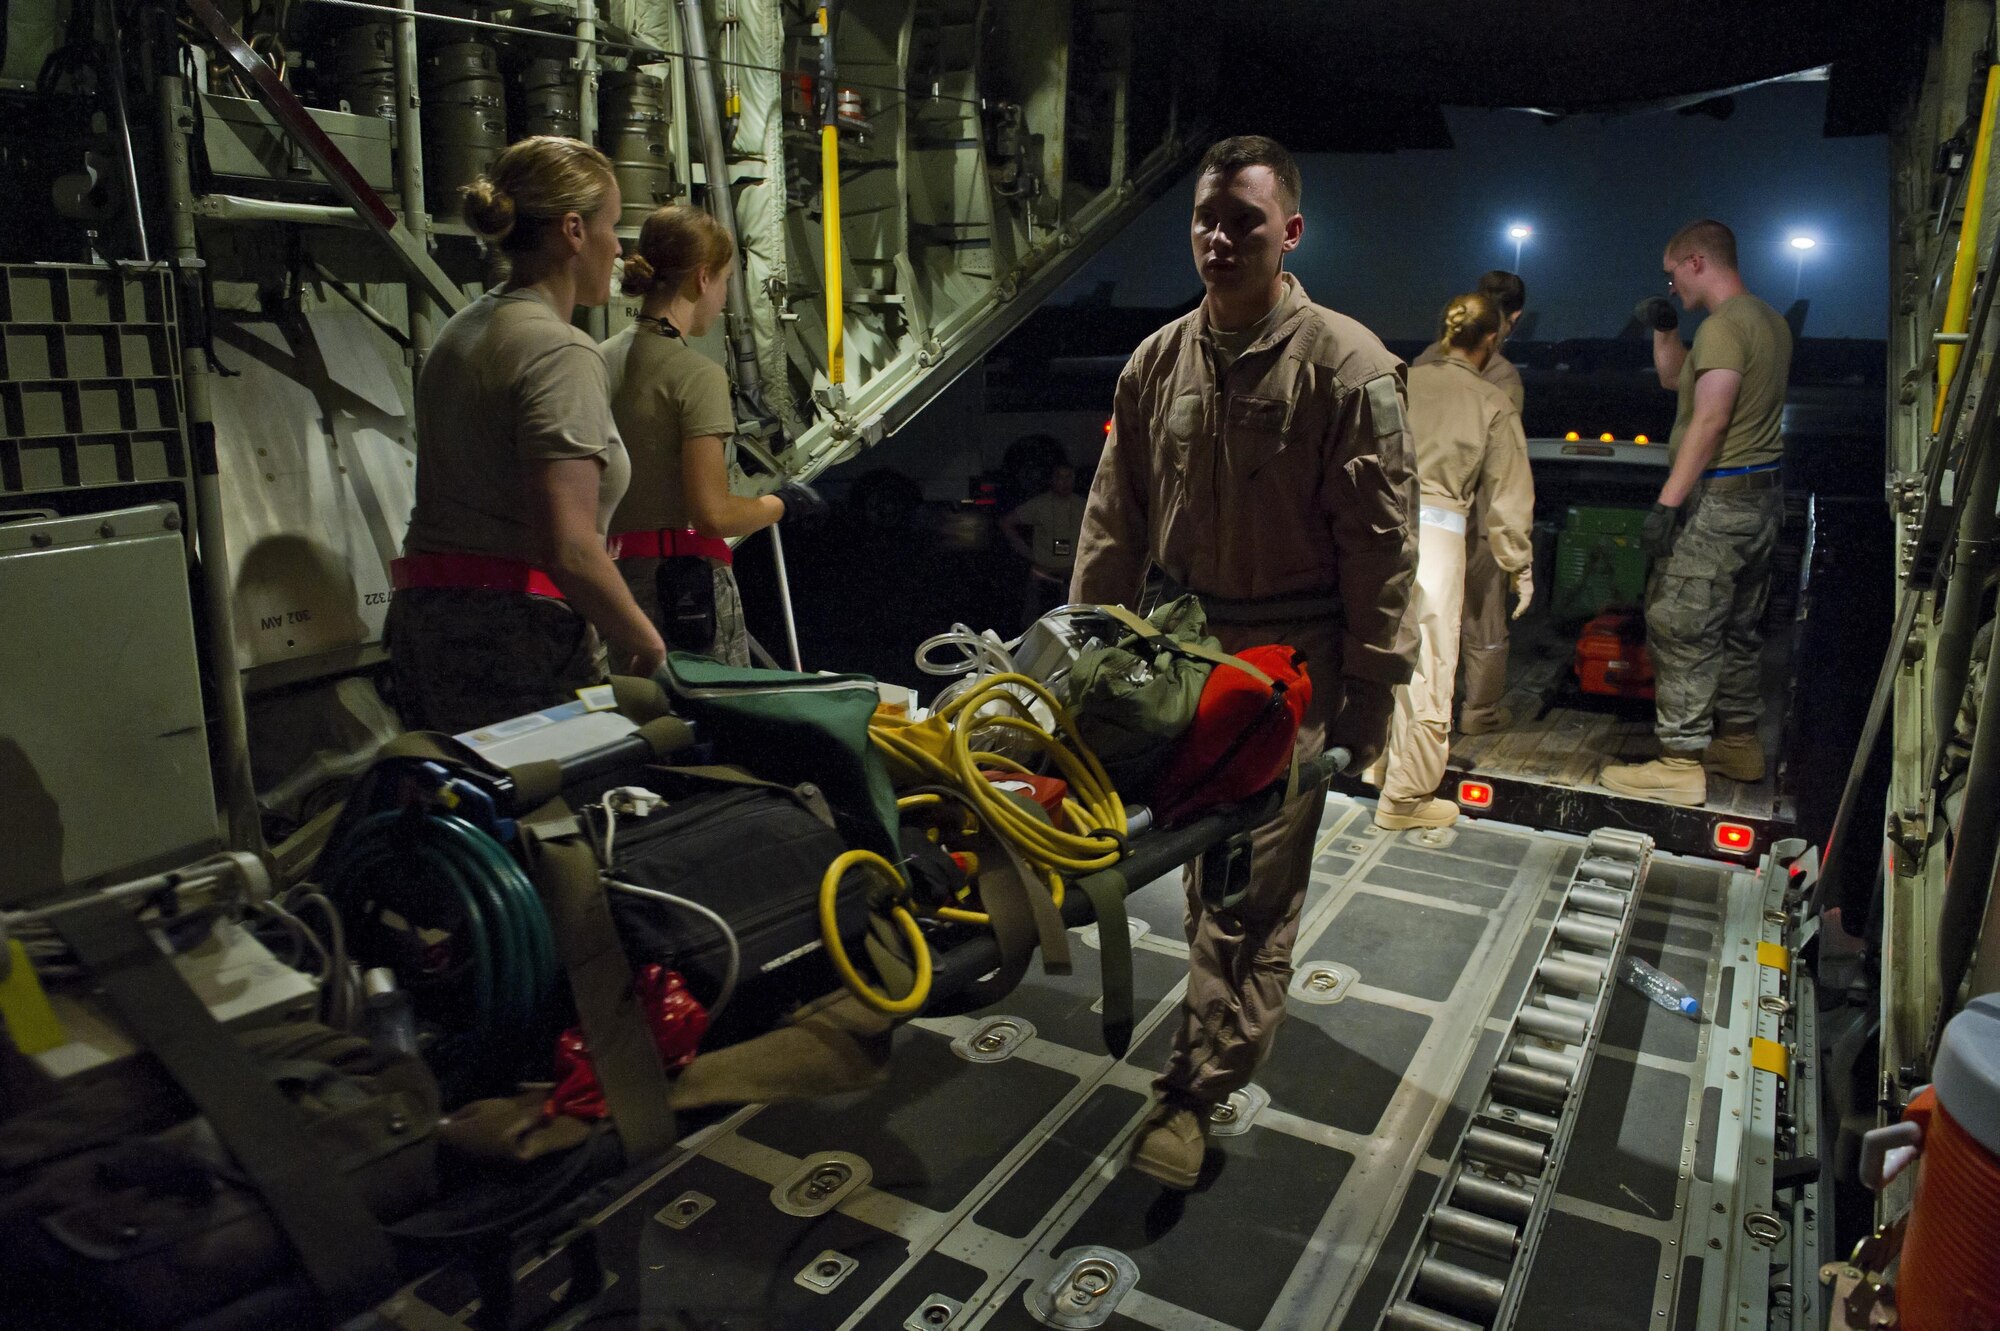 Members of the 379th Expeditionary Aeromedical Evacuation Squadron prep a C-130 Hercules before an aeromedical evacuation mission, July 19, 2013, at an undisclosed location in Southwest Asia. The EAES teams are needed to transport patients to medical facilities from remote deployed locations for additional treatment. (U.S. Air Force photo/Staff Sgt. Marleah Miller)